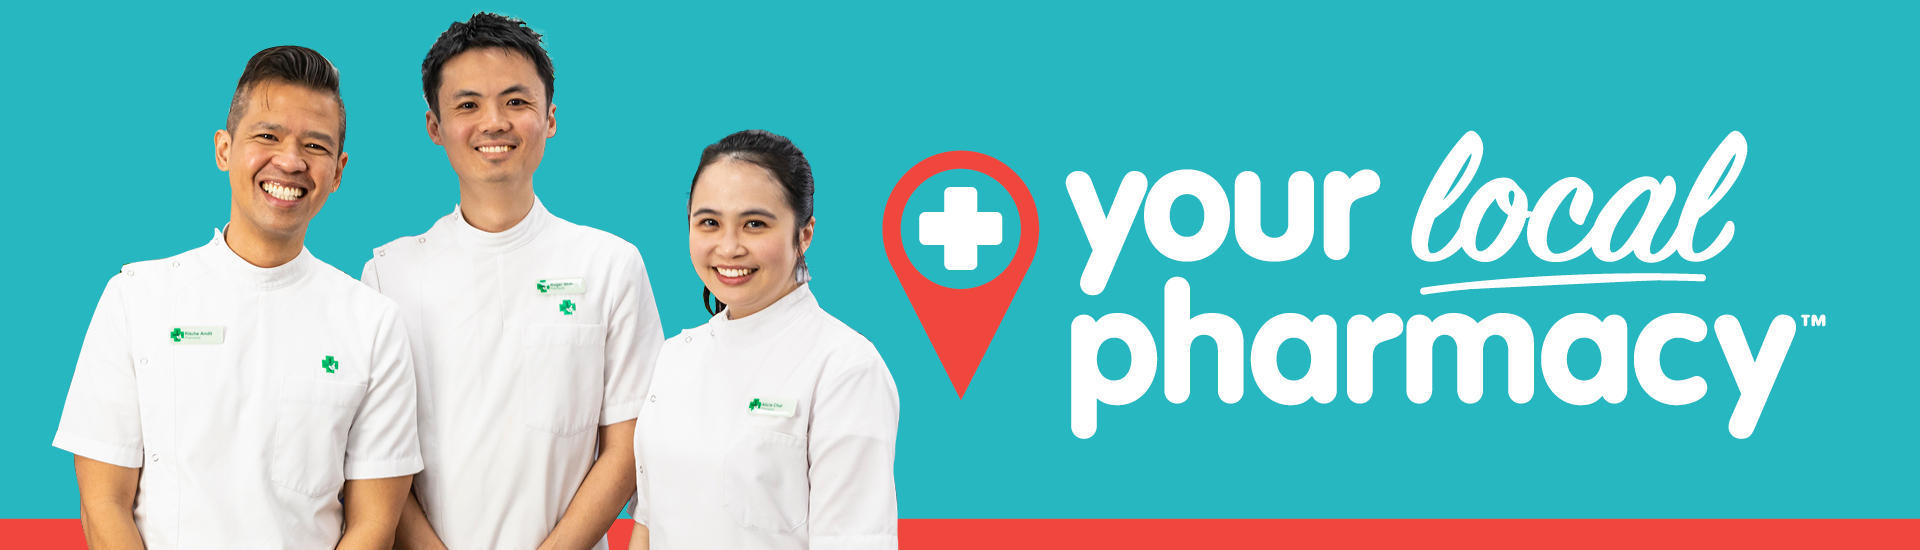 your local pharmacy banner image